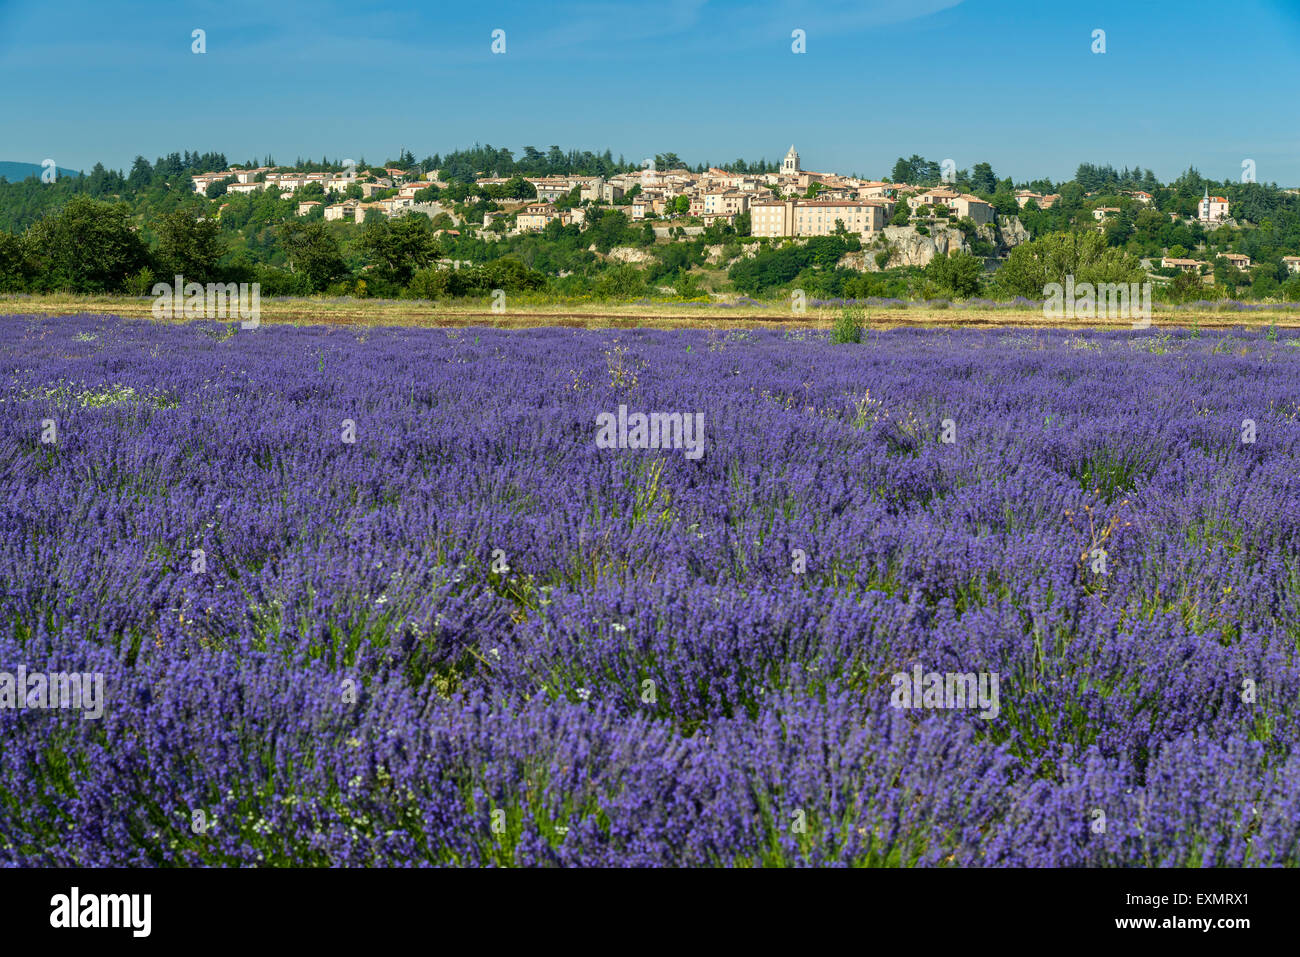 View of village of Sault with field of lavander in bloom, Vaucluse, Provence, France Stock Photo